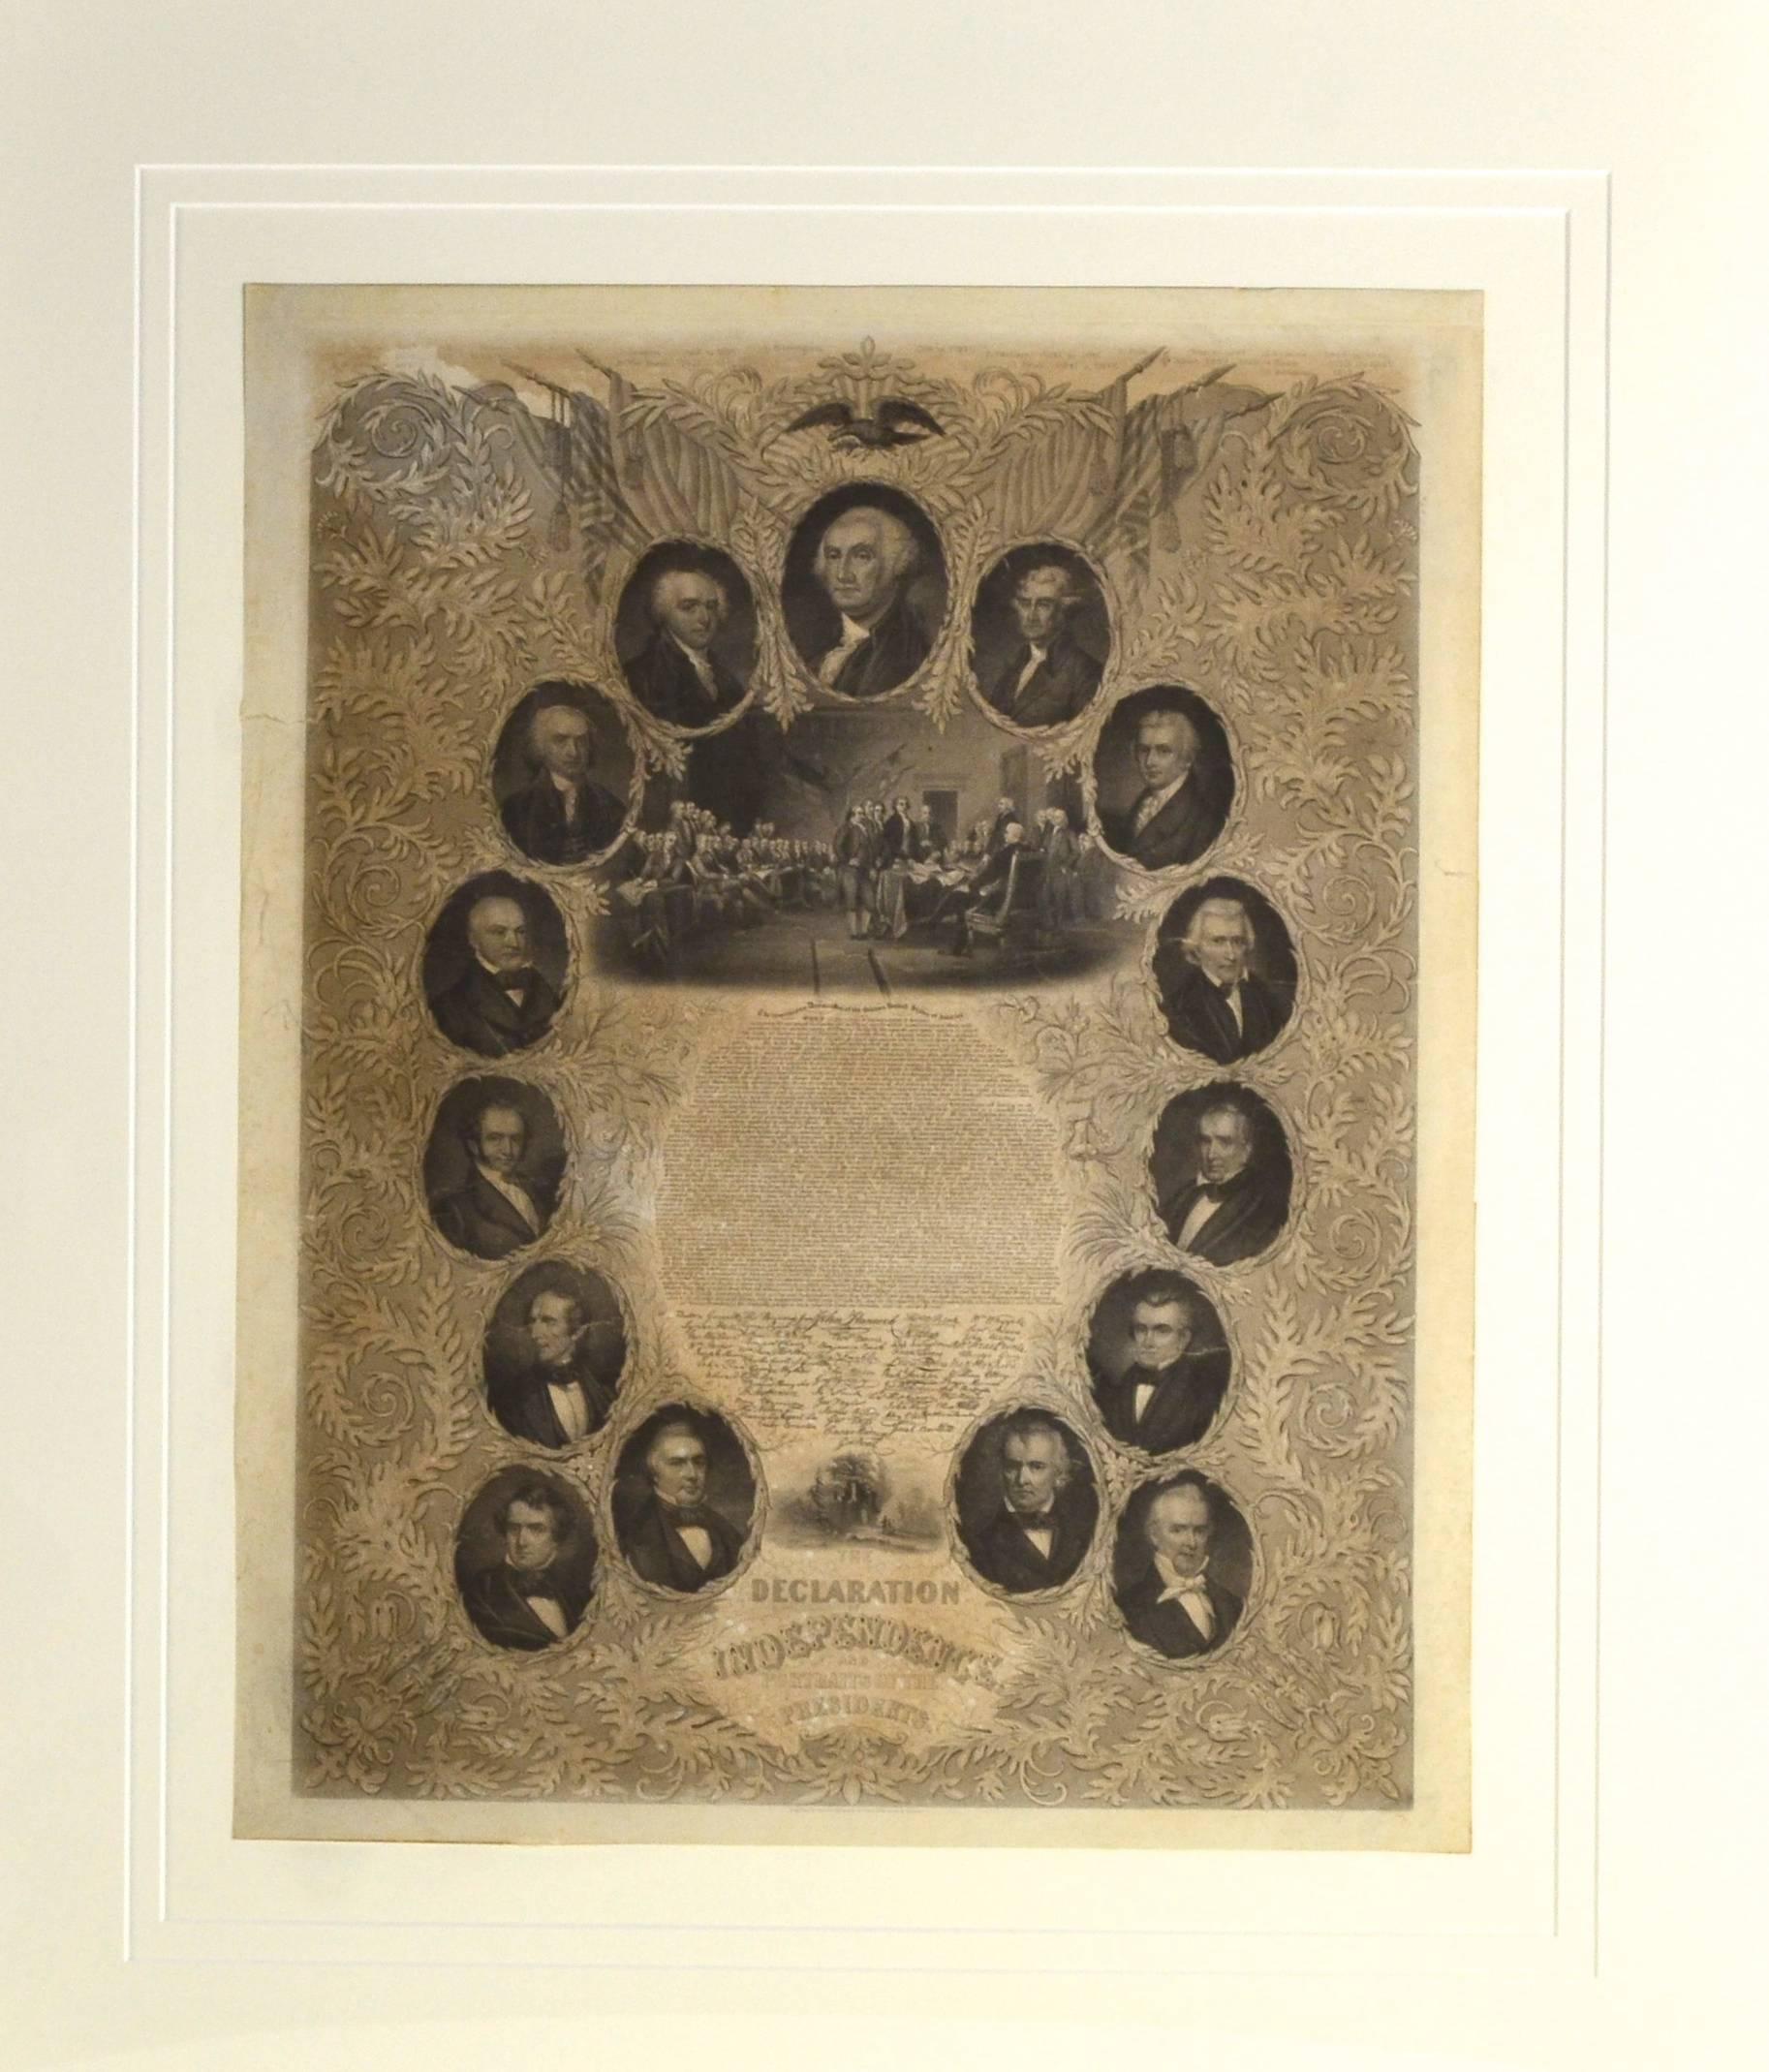 A elaborate and highly embellished 1857 printing of the declaration of independence dated 1857. The Declaration is in the middle surrounded by medallions featuring the first 15 Presidents. Printed by Ullman and Sons 603 Arch St. Phil Pa.
Museum